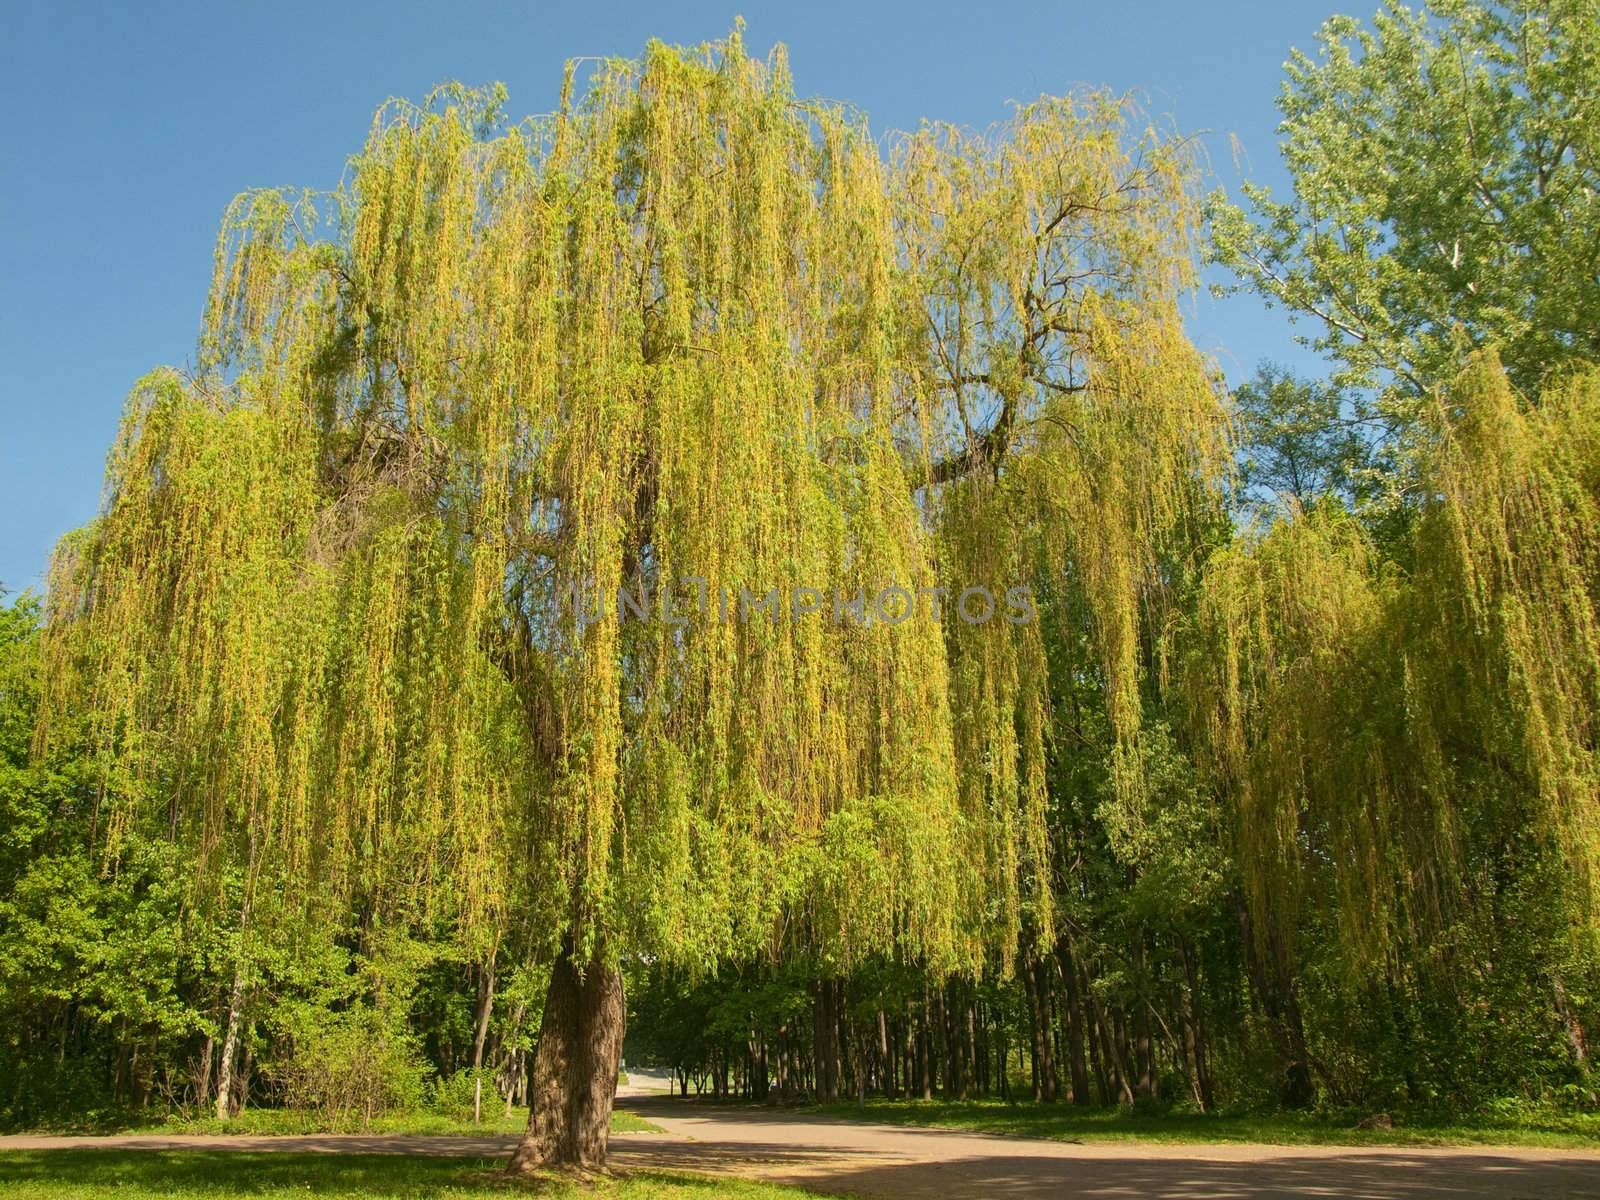 Willow tree in a park by Alex_L